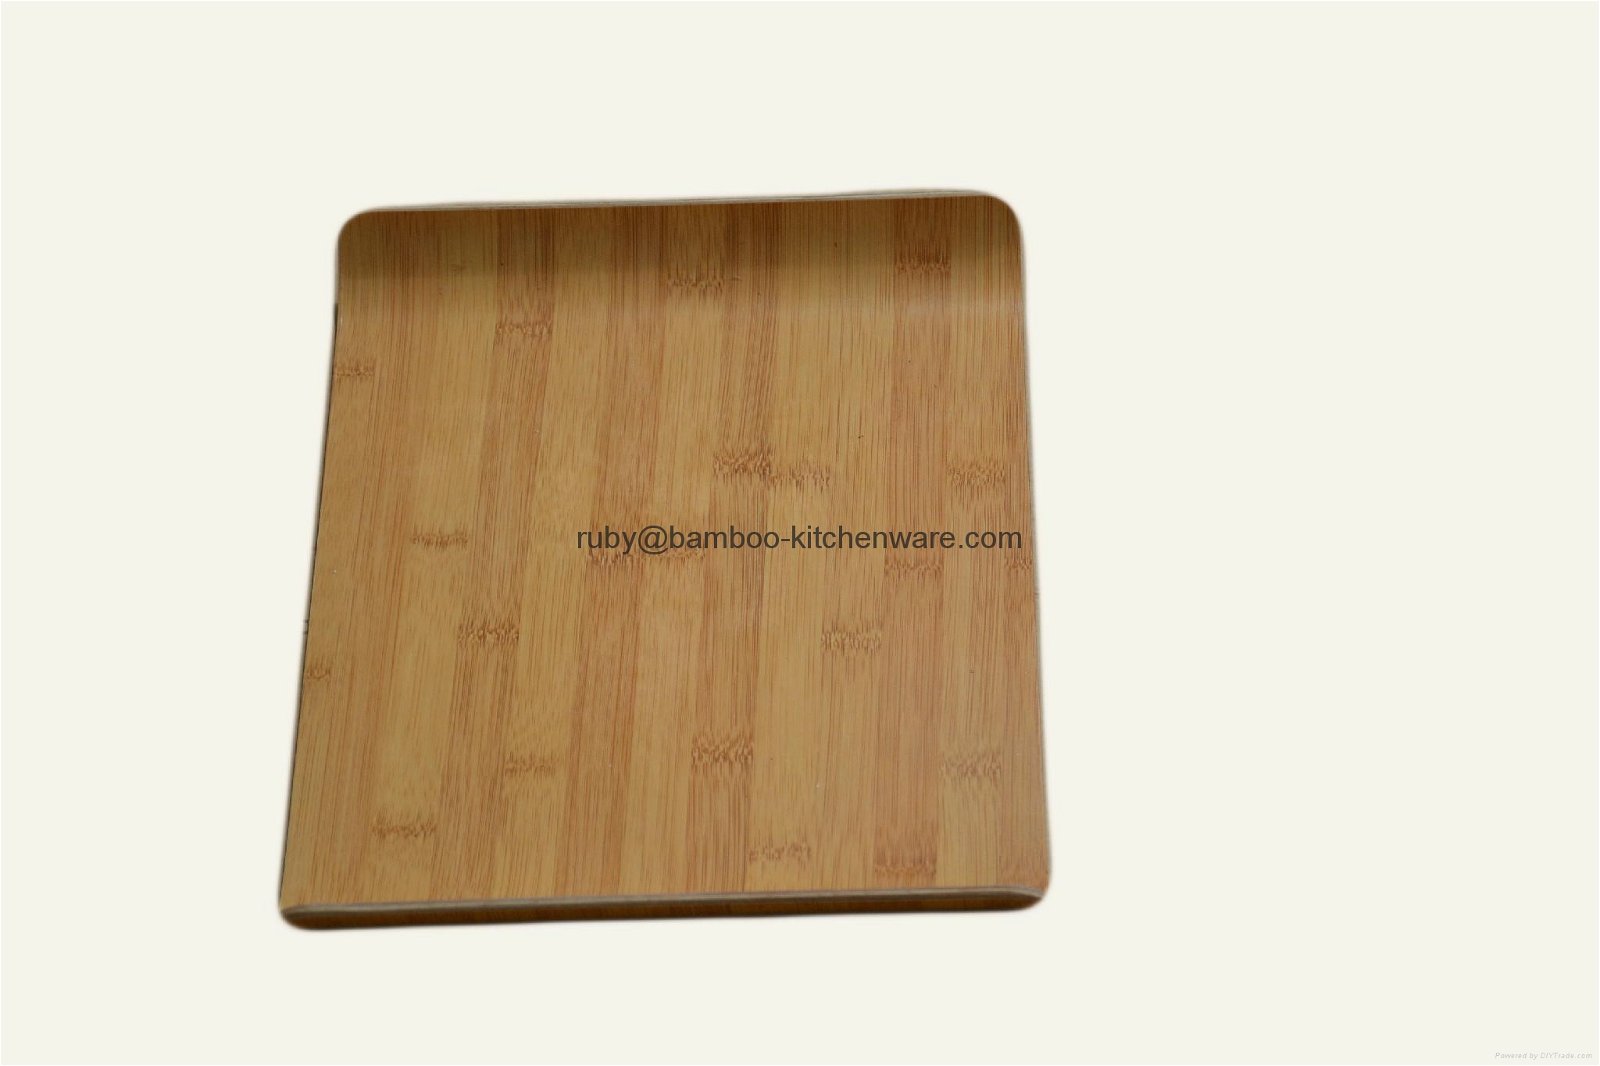 2015 Yummy Food Bamboo Roll Tea Cane Serving Platter Tray 